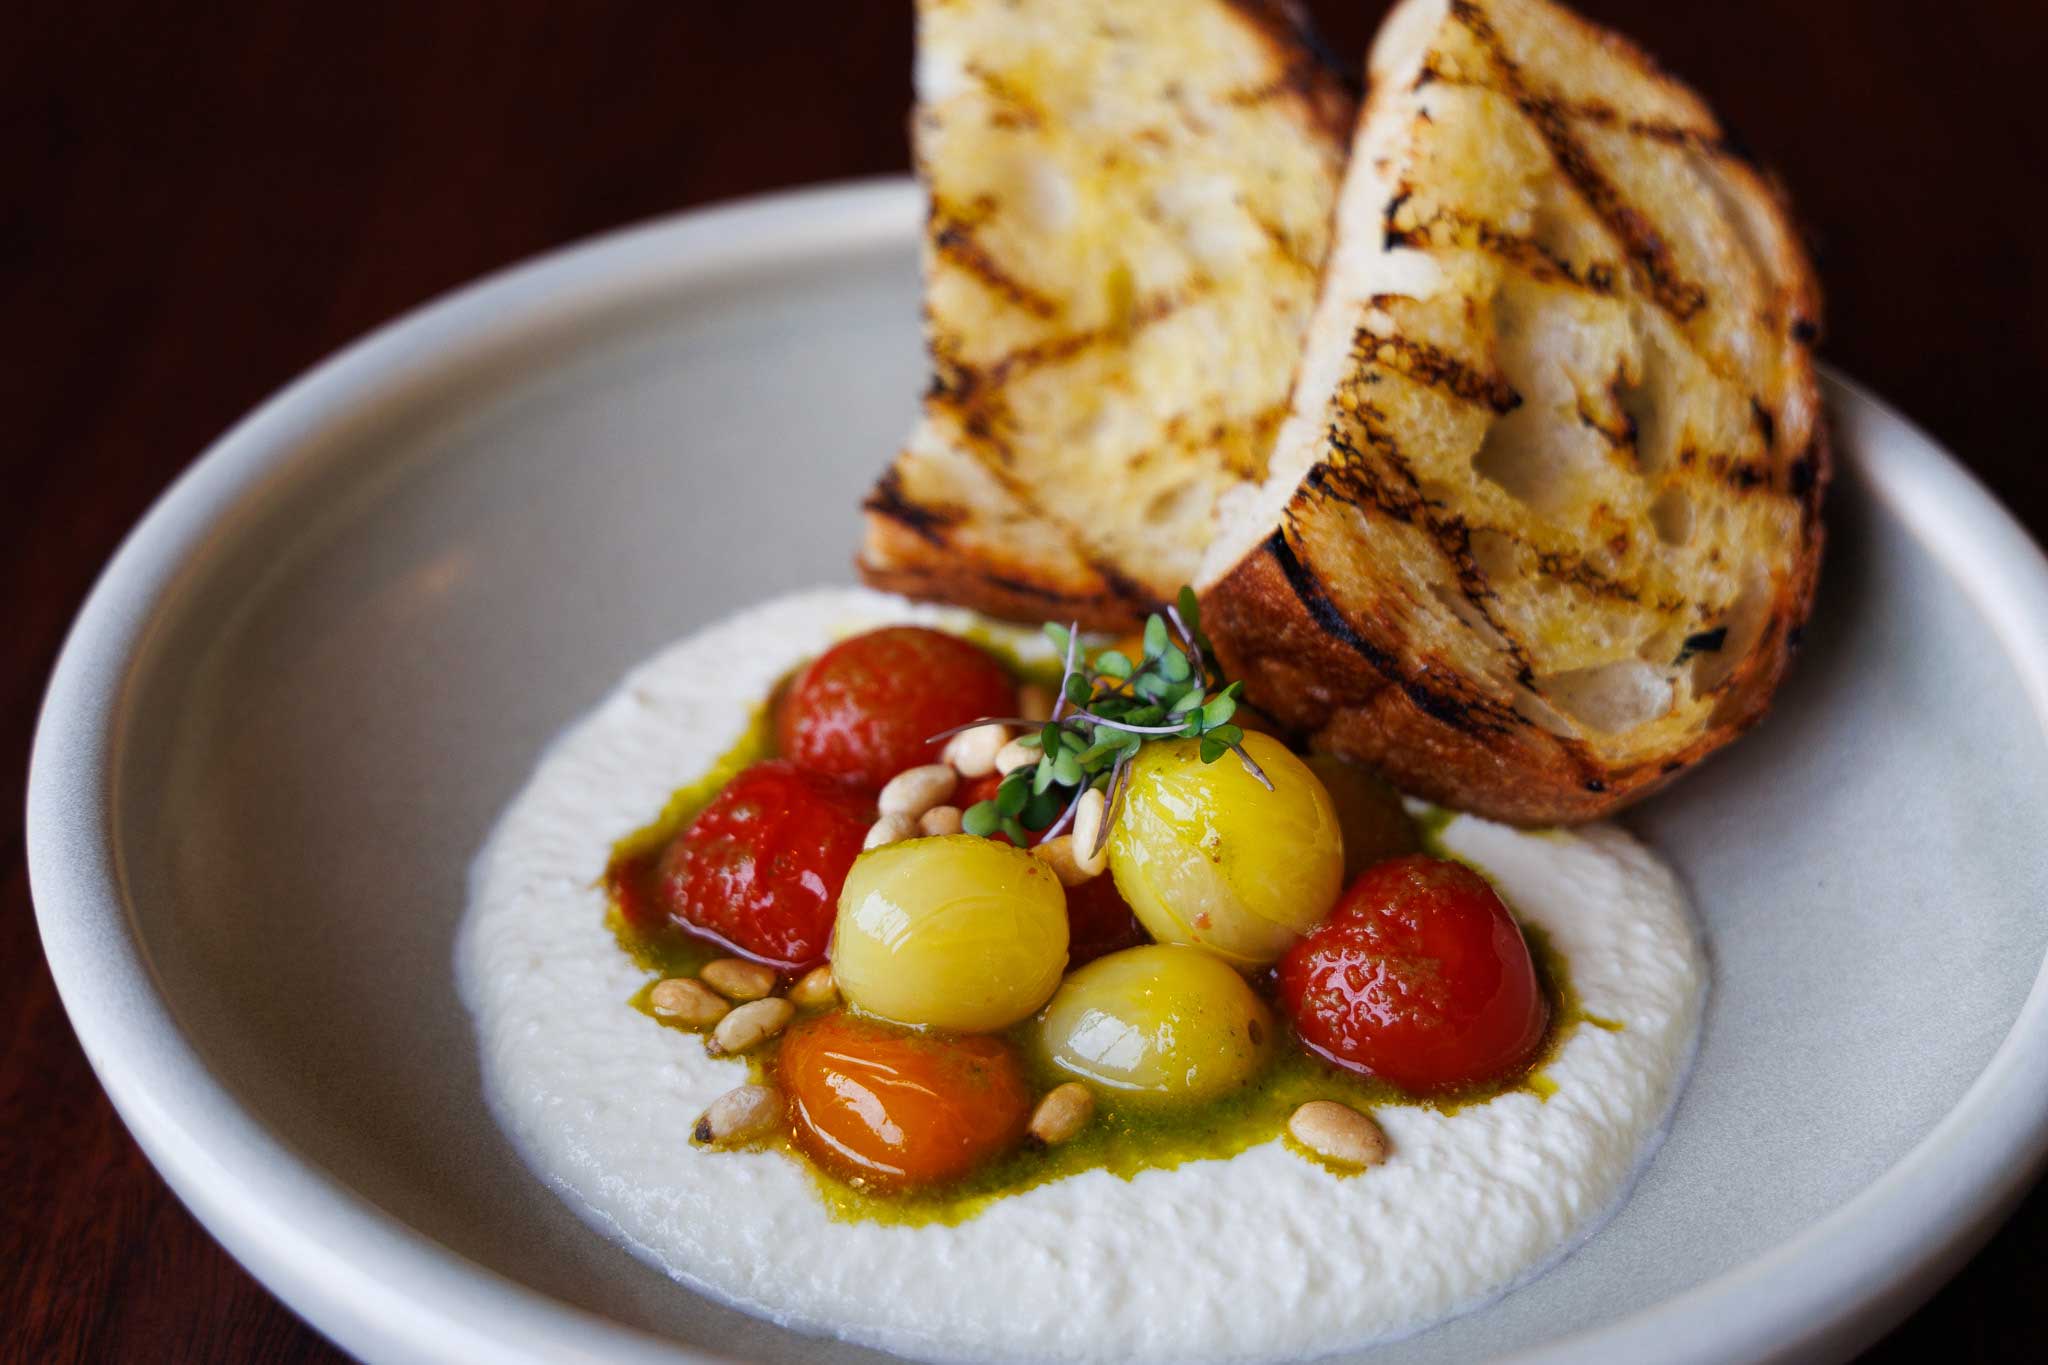 Whipped feta dip with cherry tomatoes and pine nuts served with grilled sourdough bread